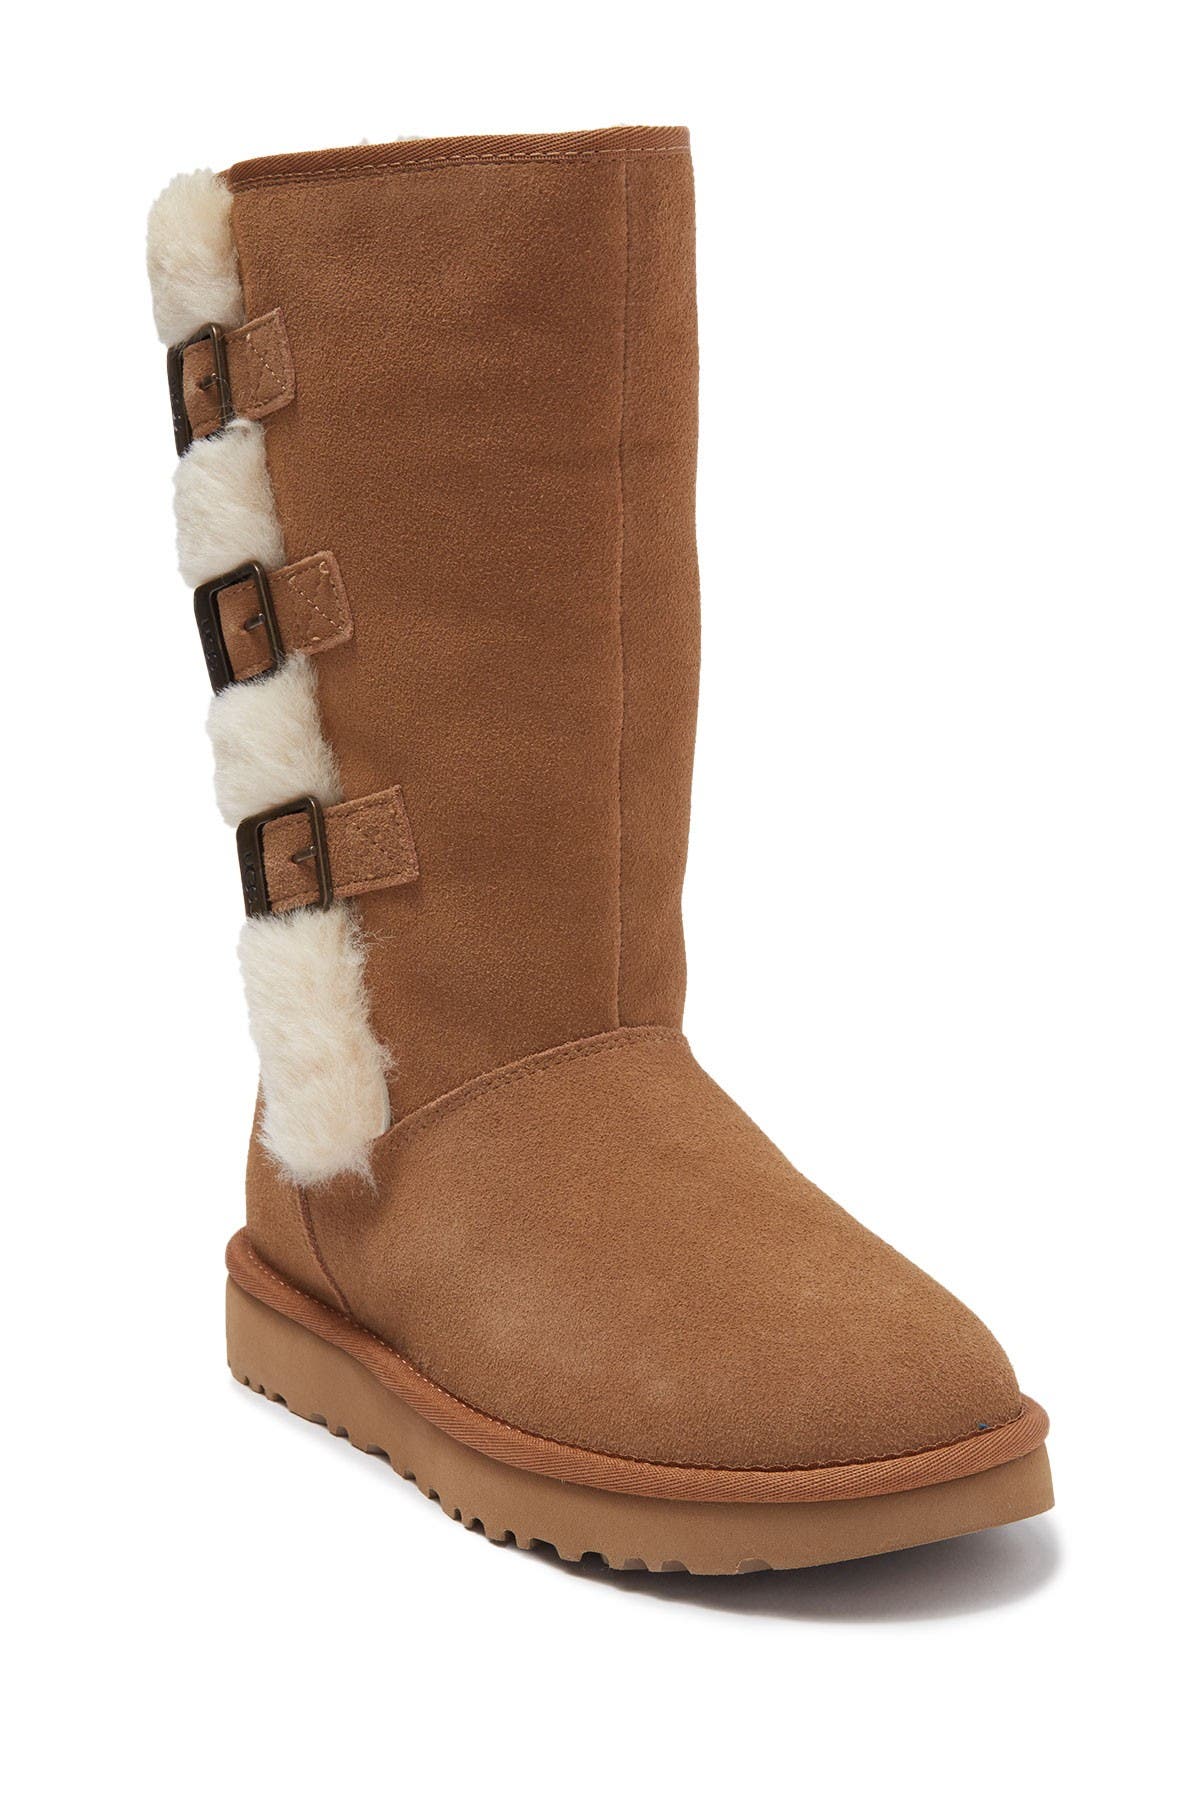 tall ugg boots with fur